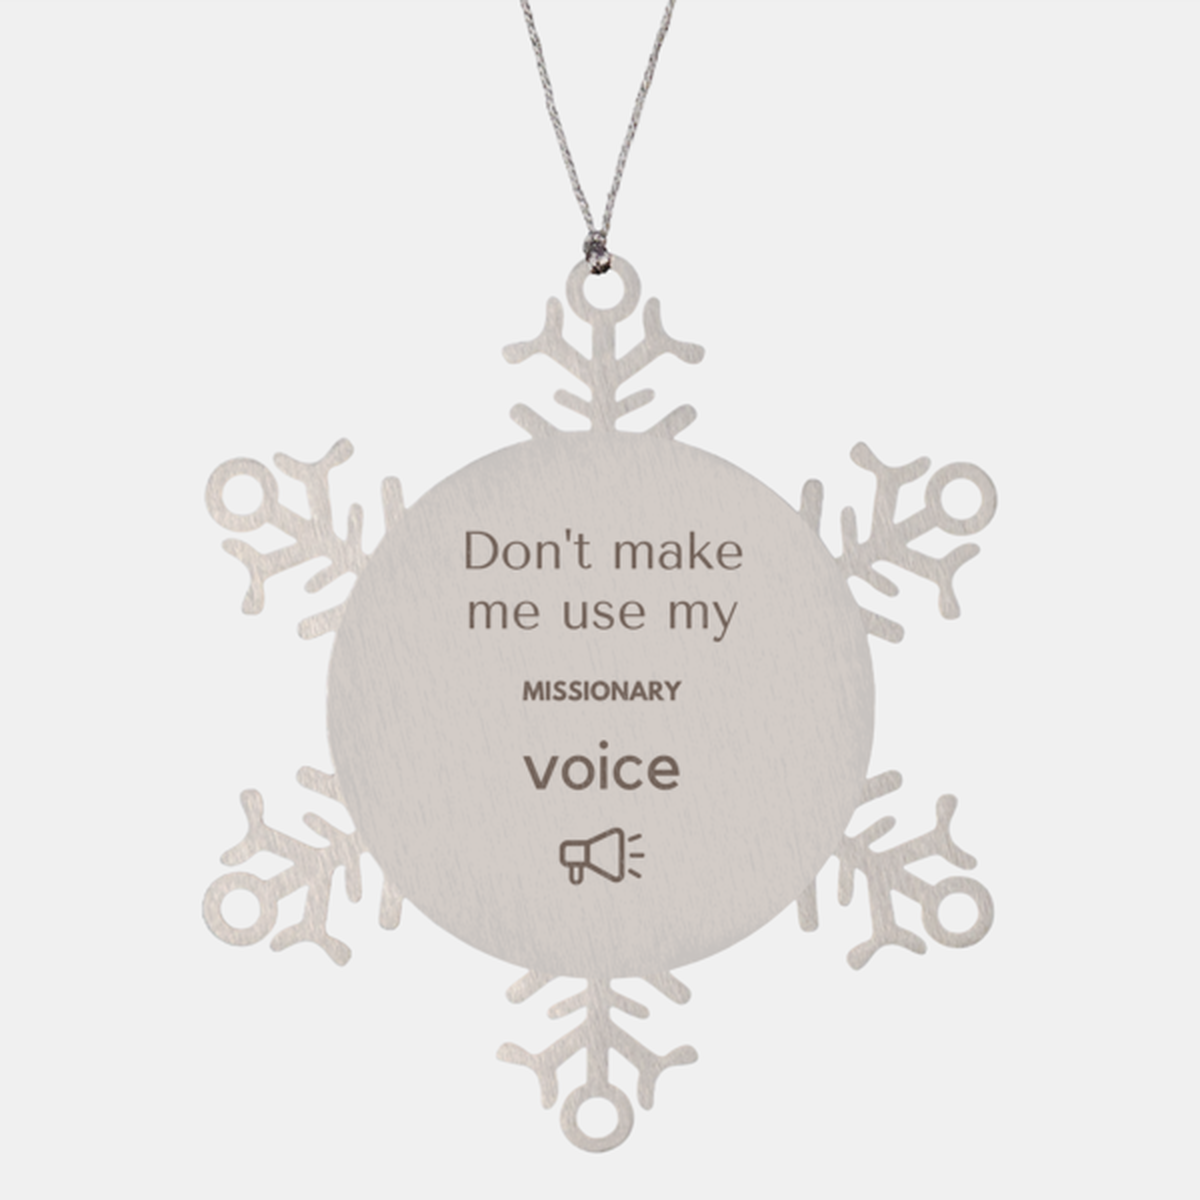 Don't make me use my Missionary voice, Sarcasm Missionary Ornament Gifts, Christmas Missionary Snowflake Ornament Unique Gifts For Missionary Coworkers, Men, Women, Colleague, Friends